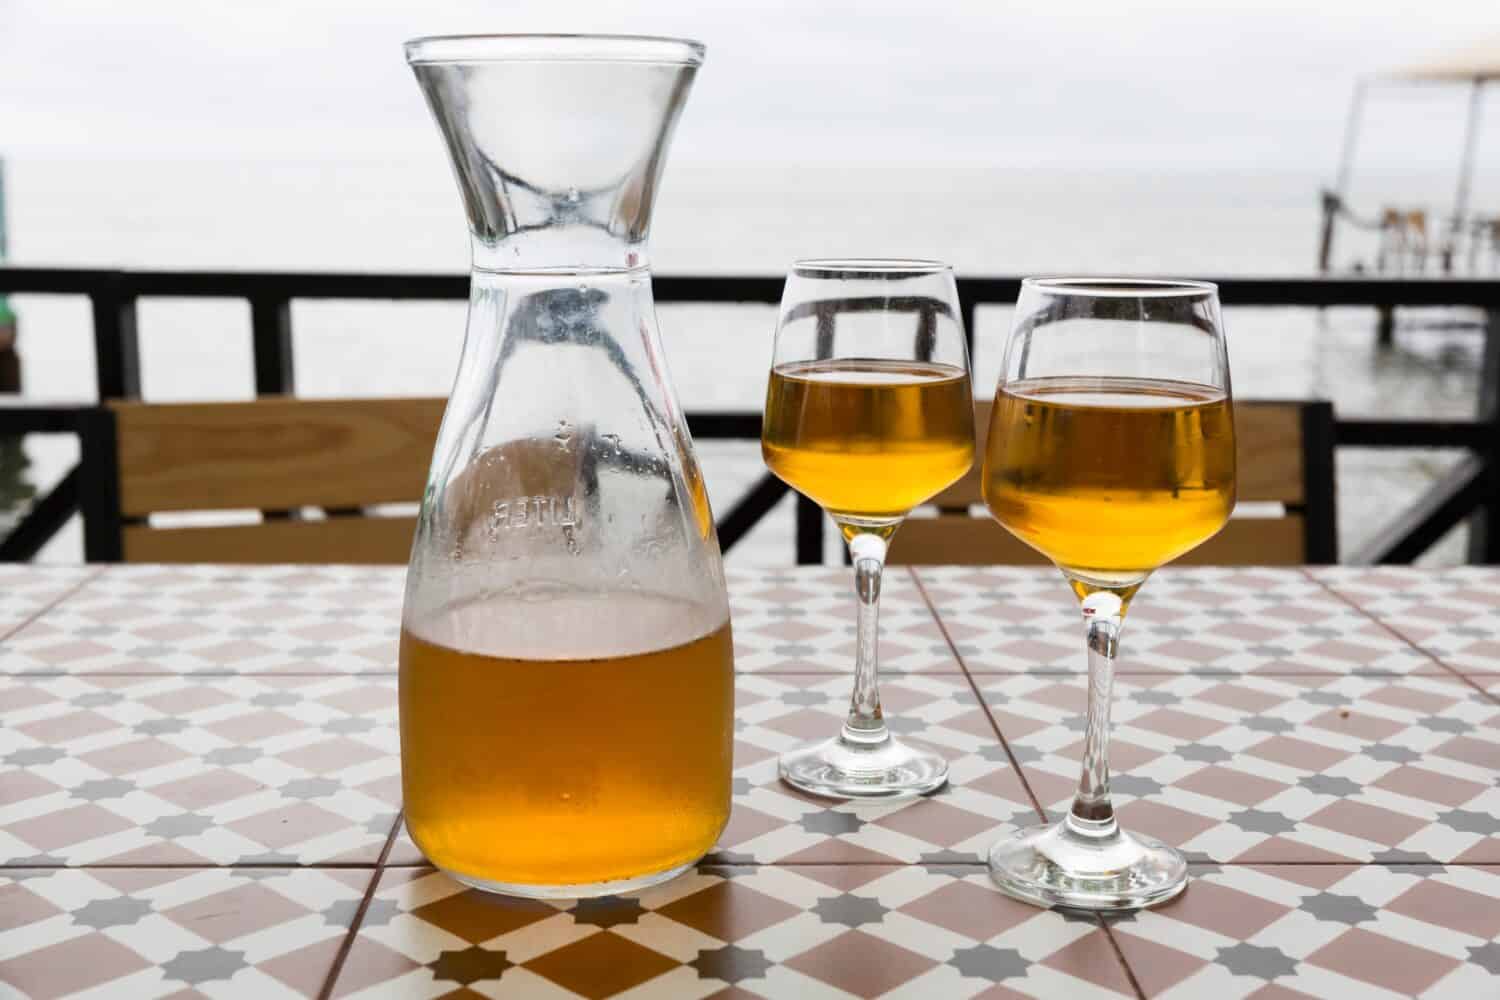 Orange wine from Kvevri. Batumi, Tbilisi restaurant on the seashore. A pitcher and two glasses. Against the background of the sea